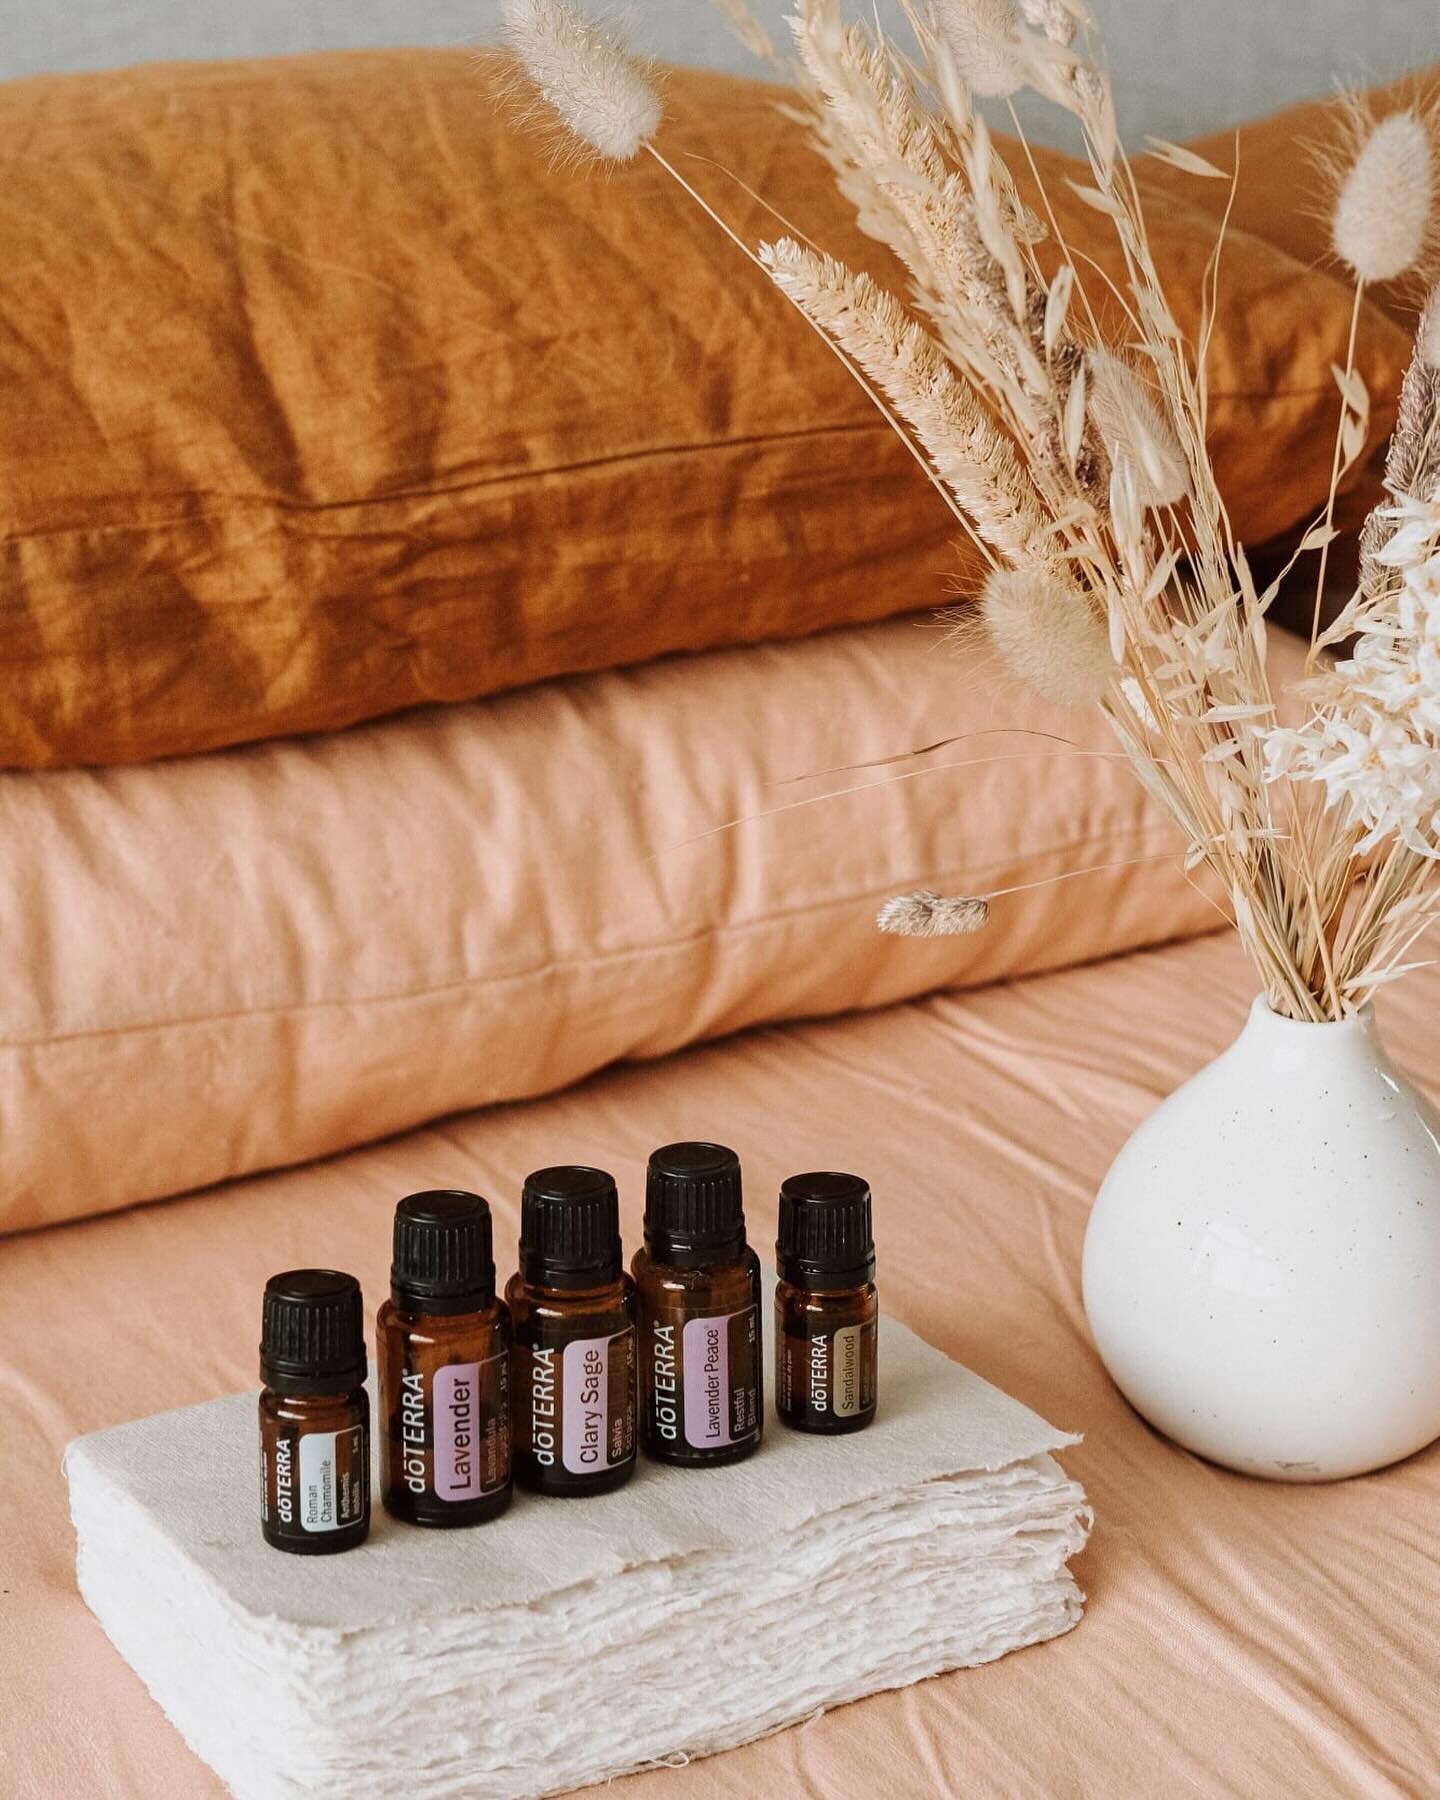 **INTRODUCTION TO ESSENTIAL OILS**
An Introduction to Essential Oils with Angela Dias @simply.angela.dias at Art House
Saturday 17th February from 10:30 to 12:30

Do you feel lost in a sea of information when it comes to your health? Does an ancient 